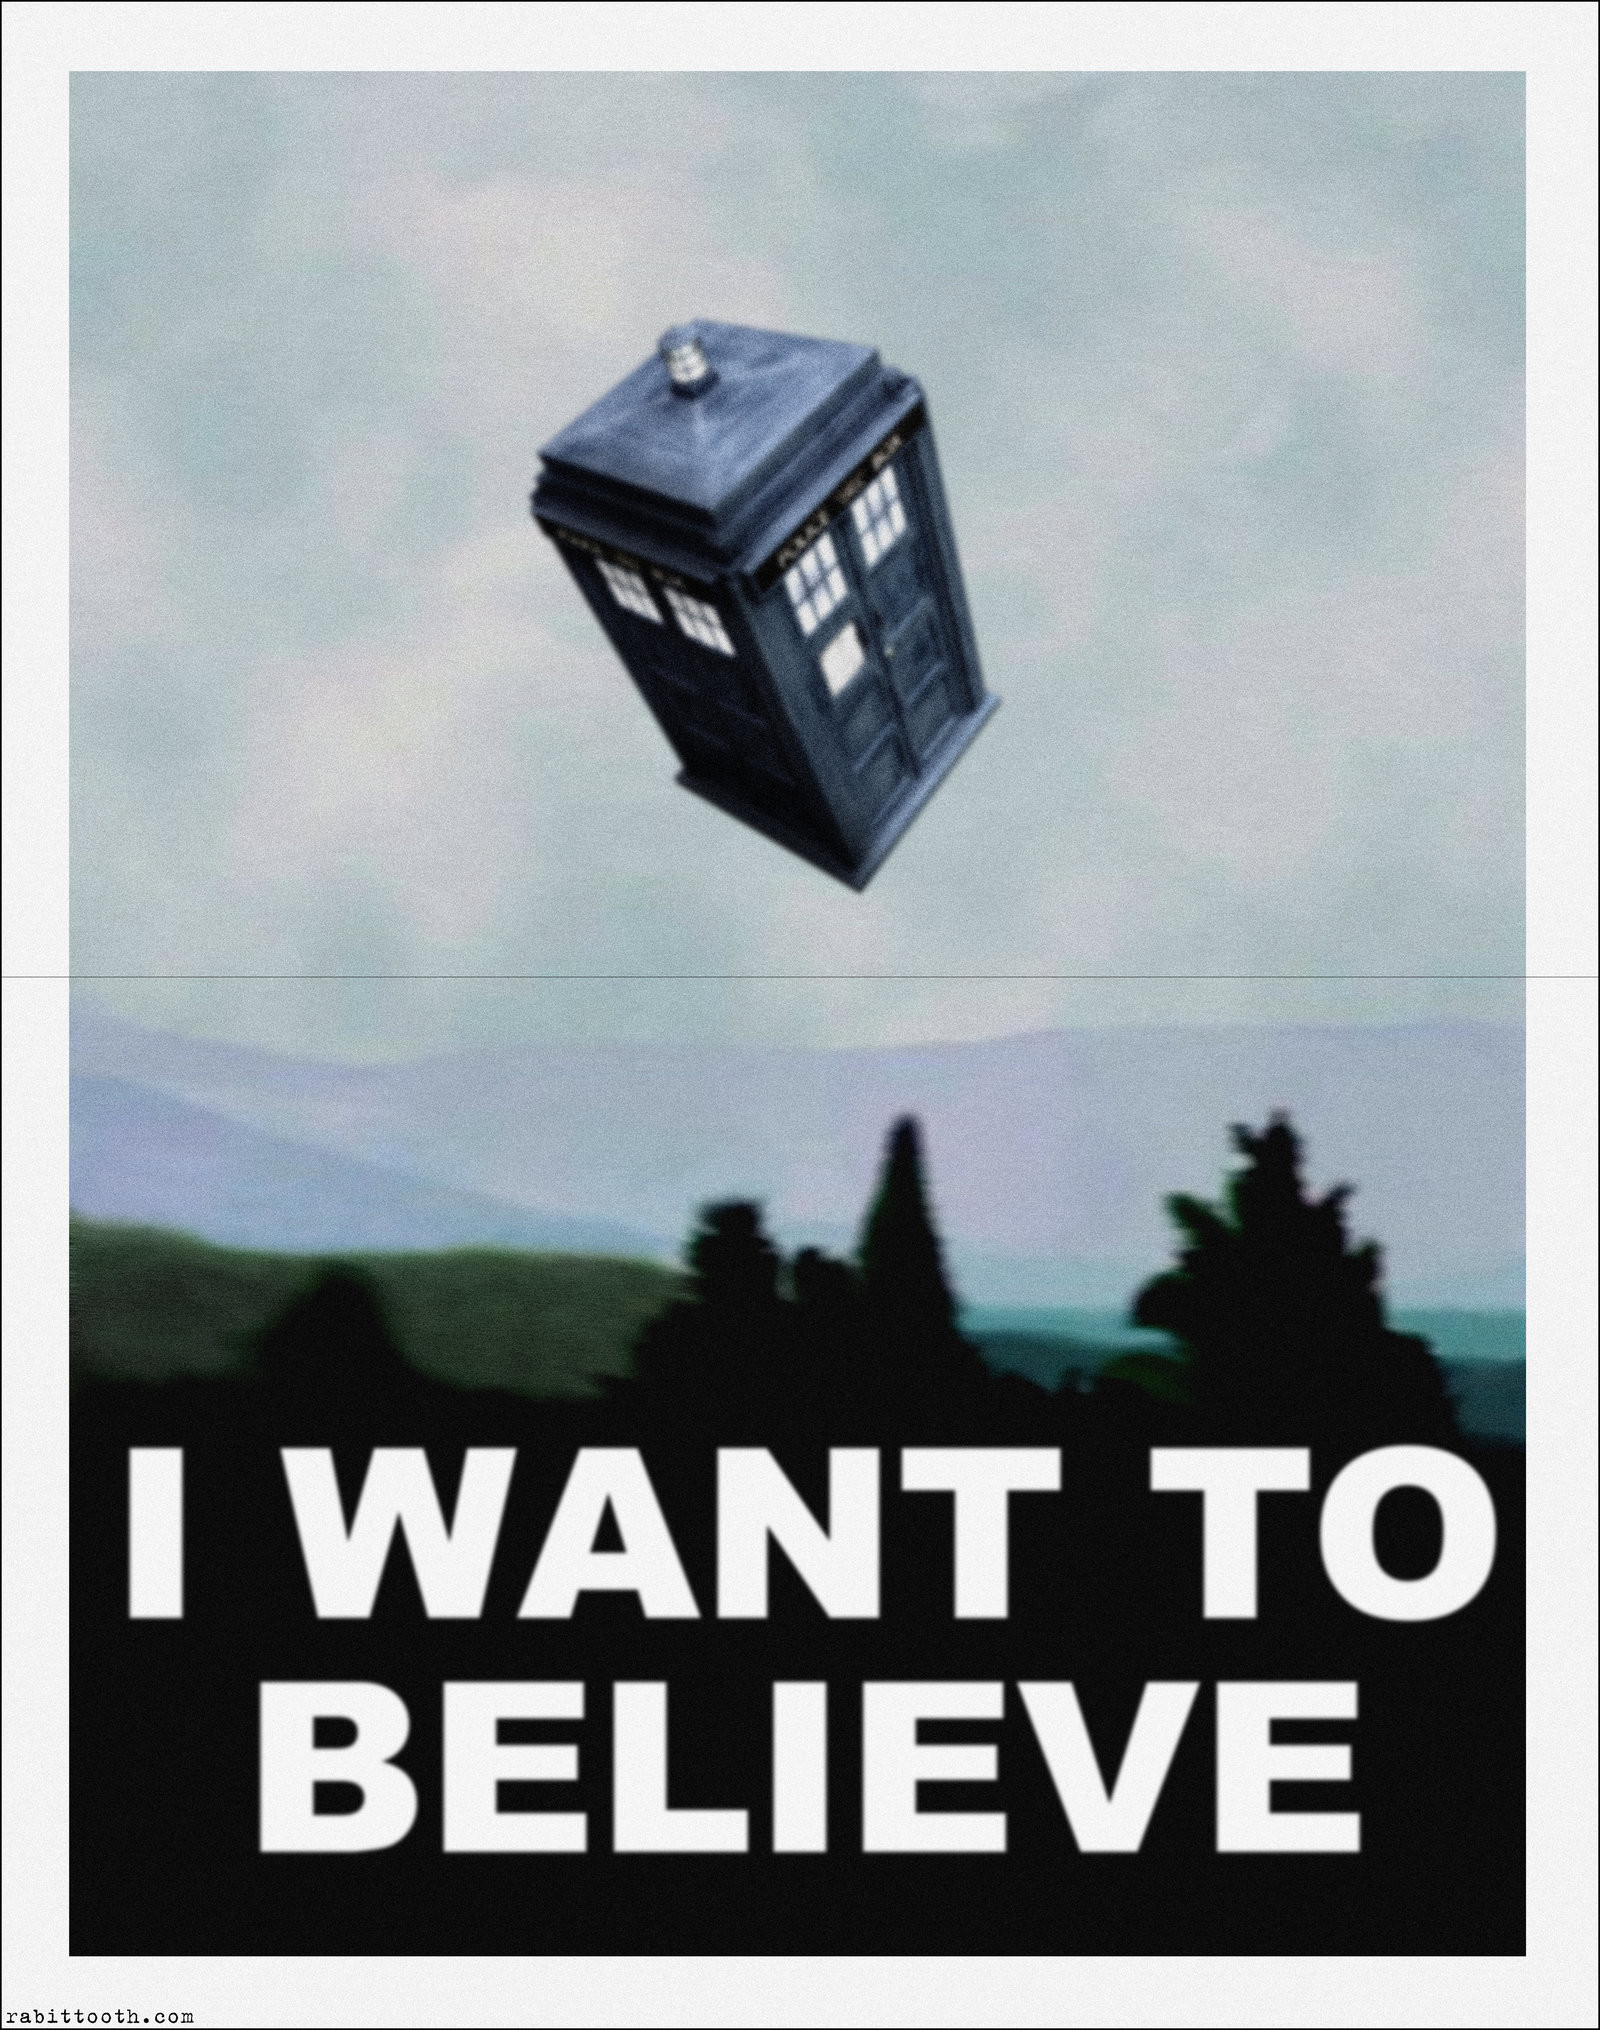 … TARDIS / Dr. Who-X-Files I Want To Believe Poster by Rabittooth